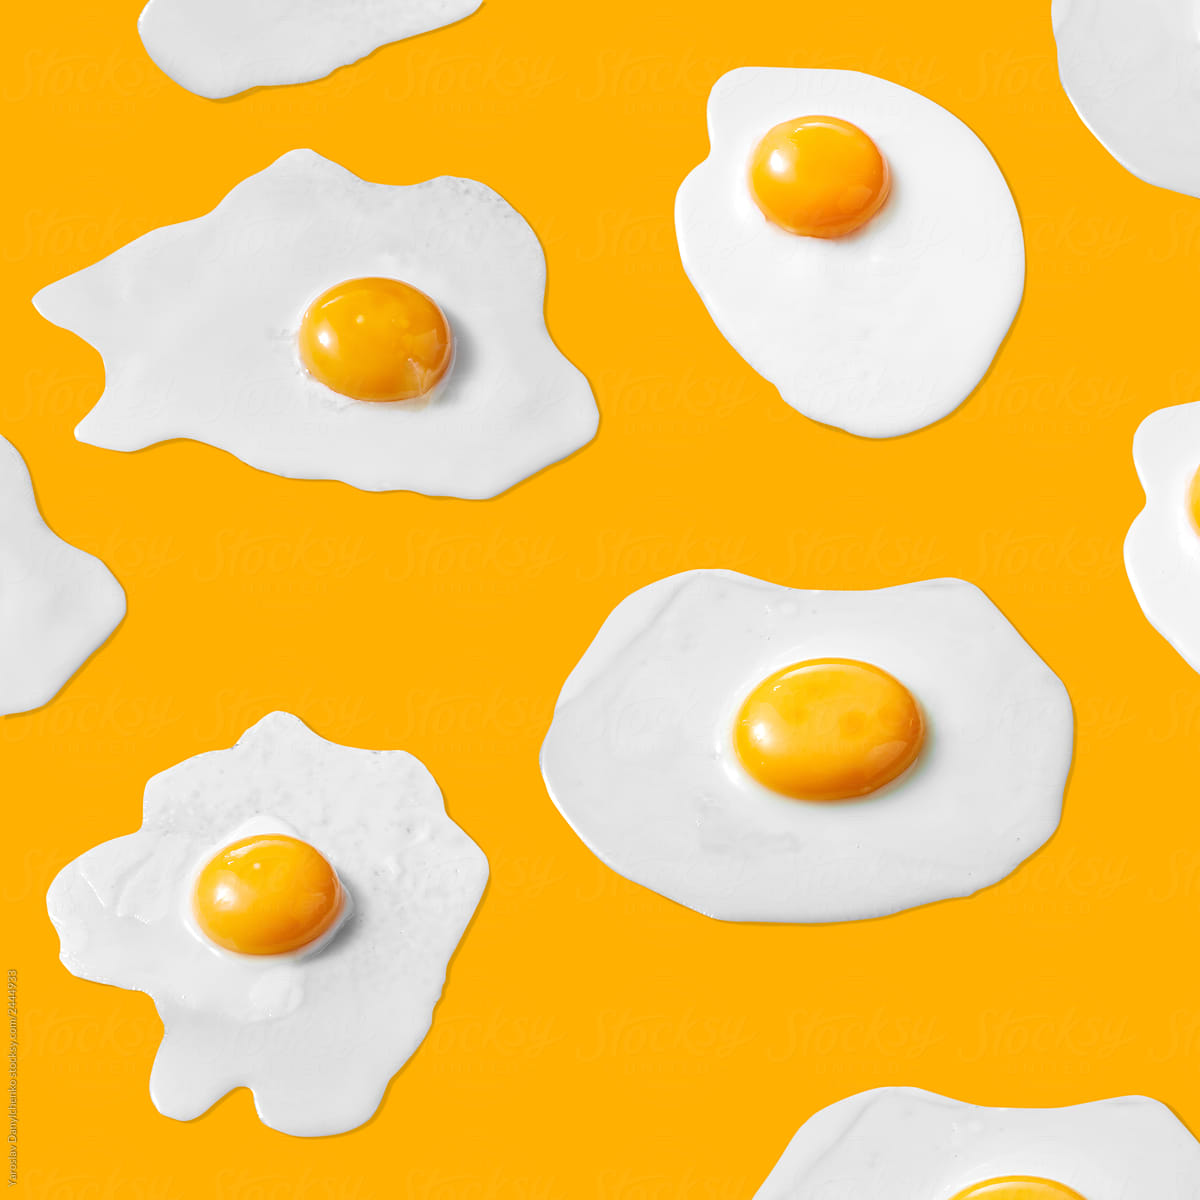 Food pattern from fried eggs with yolks on a yellow background.